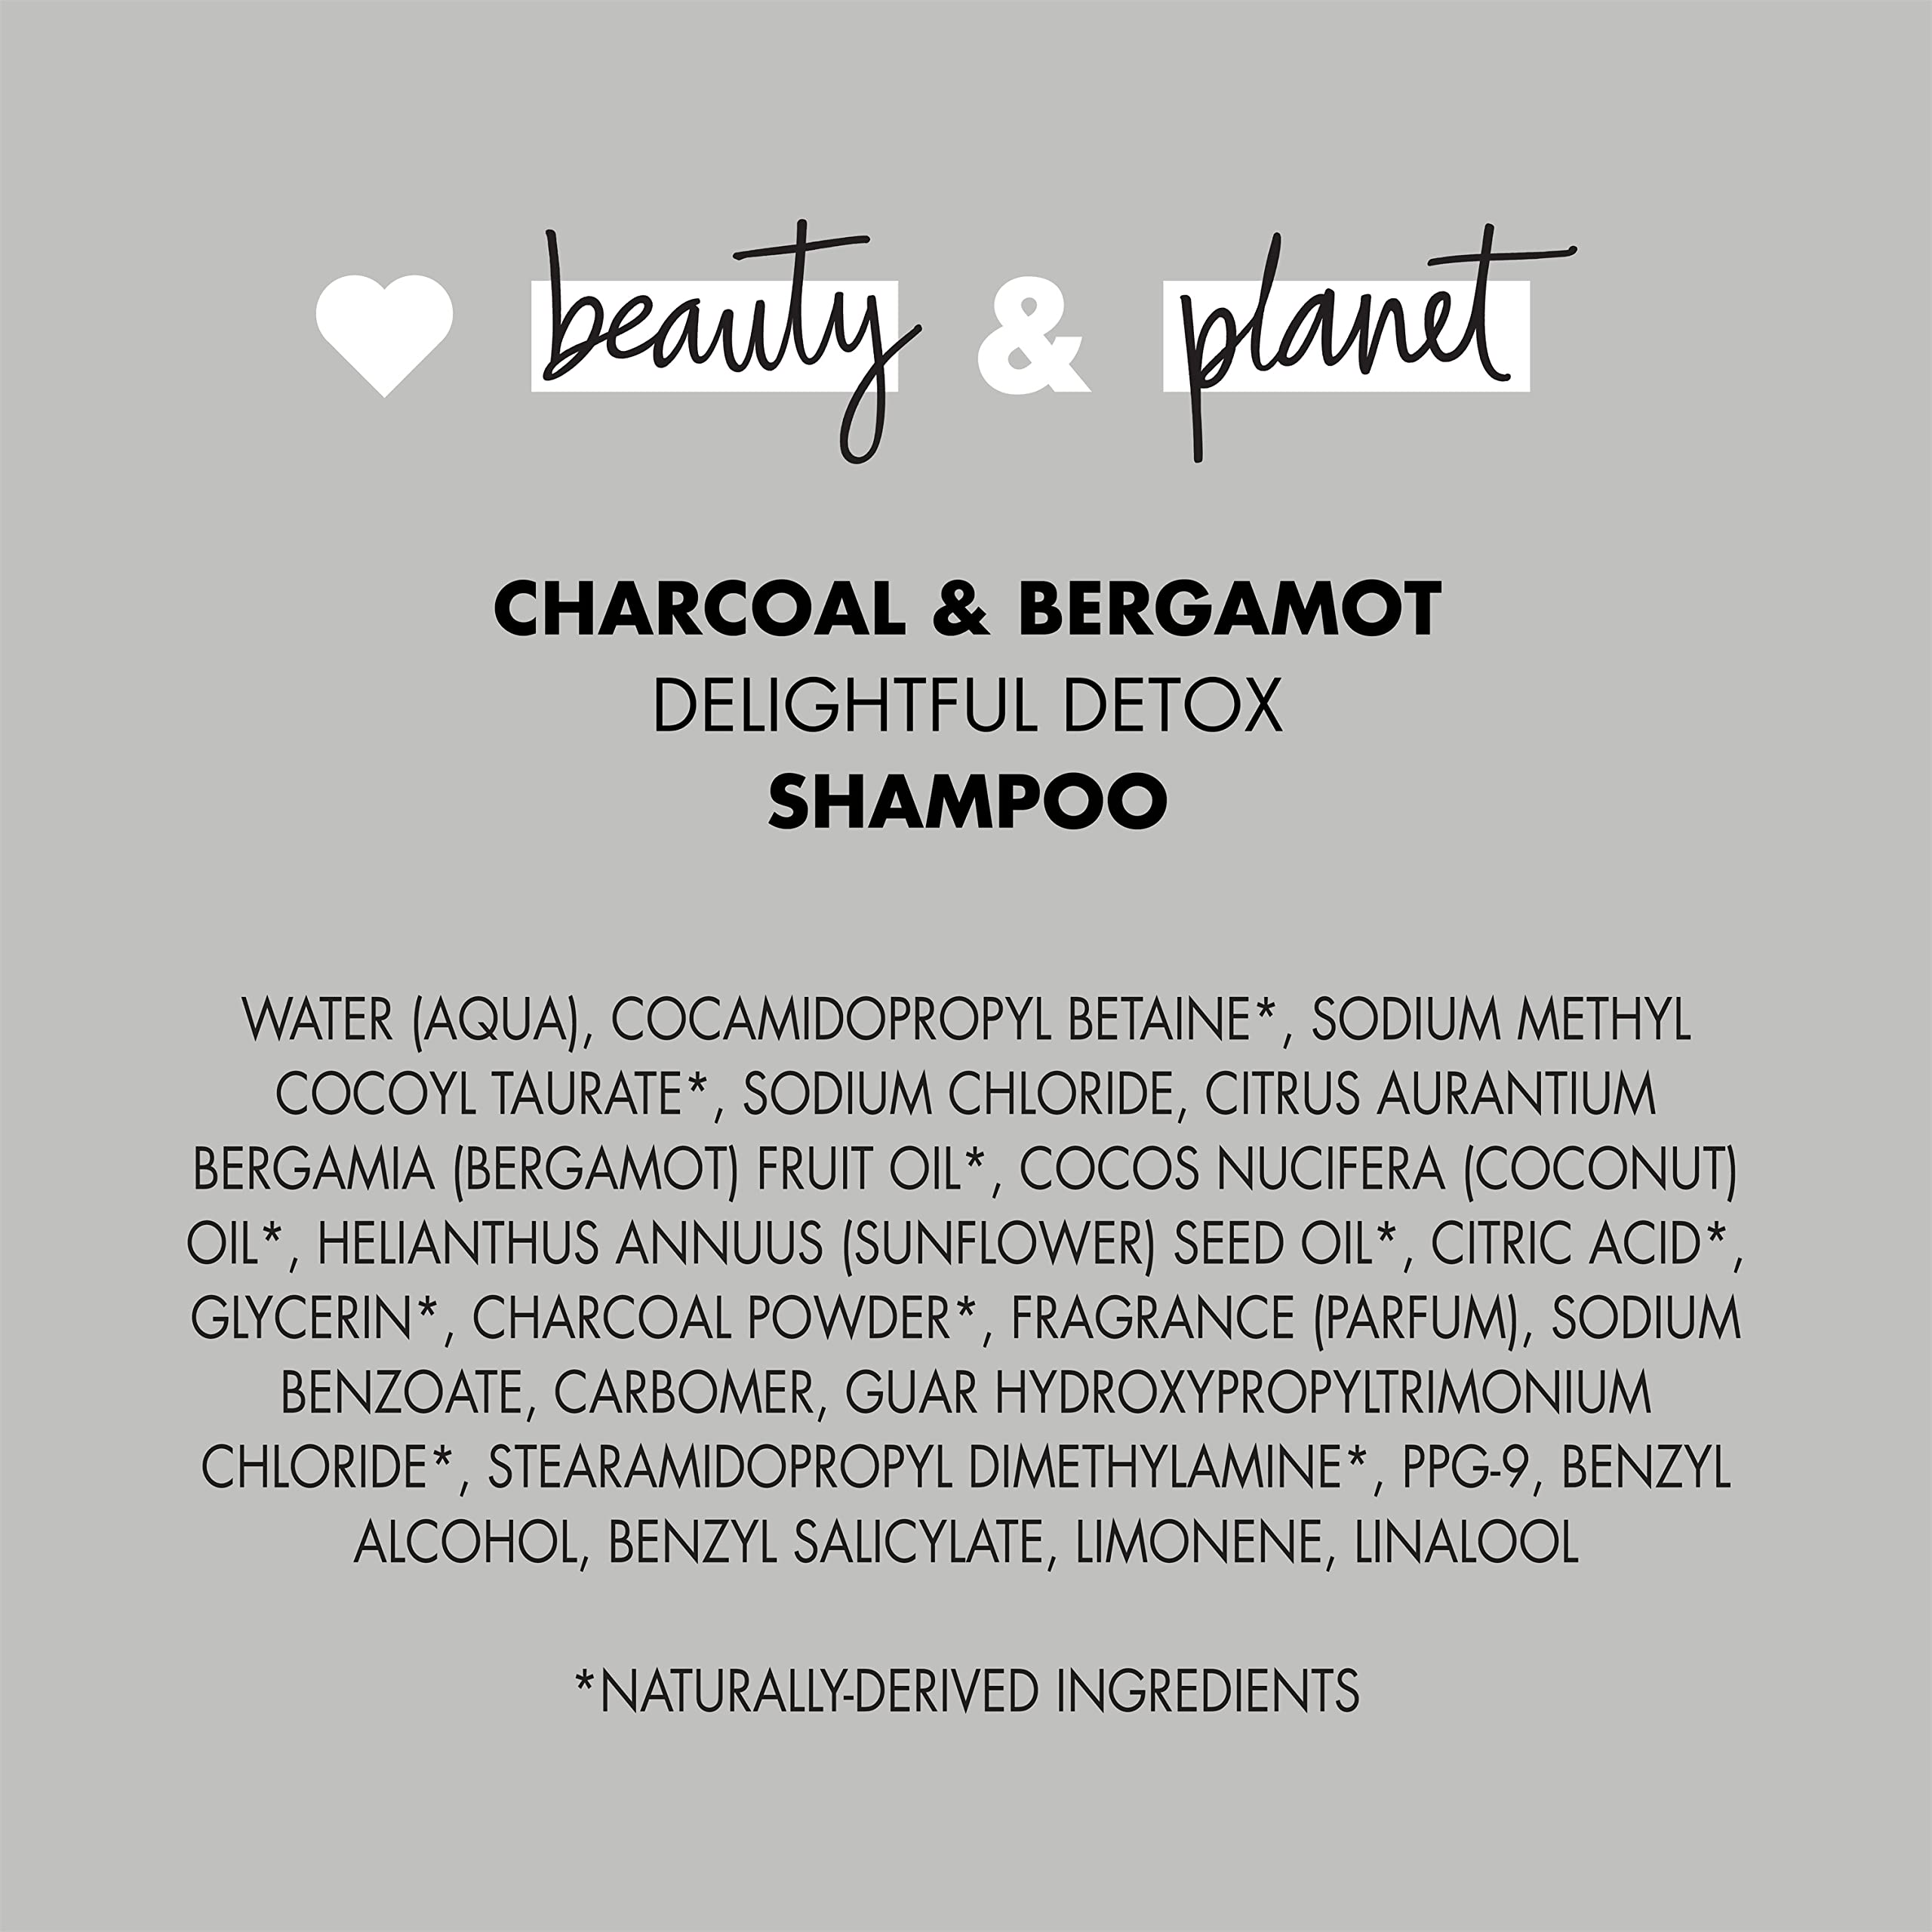 Love Beauty and Planet Delightful Detox Daily Clarifying Sulfate-Free Shampoo Charcoal and Bergamot Cleansed Hair Care Silicone-free, Paraben-free, Vegan Shampoo 32.3 oz